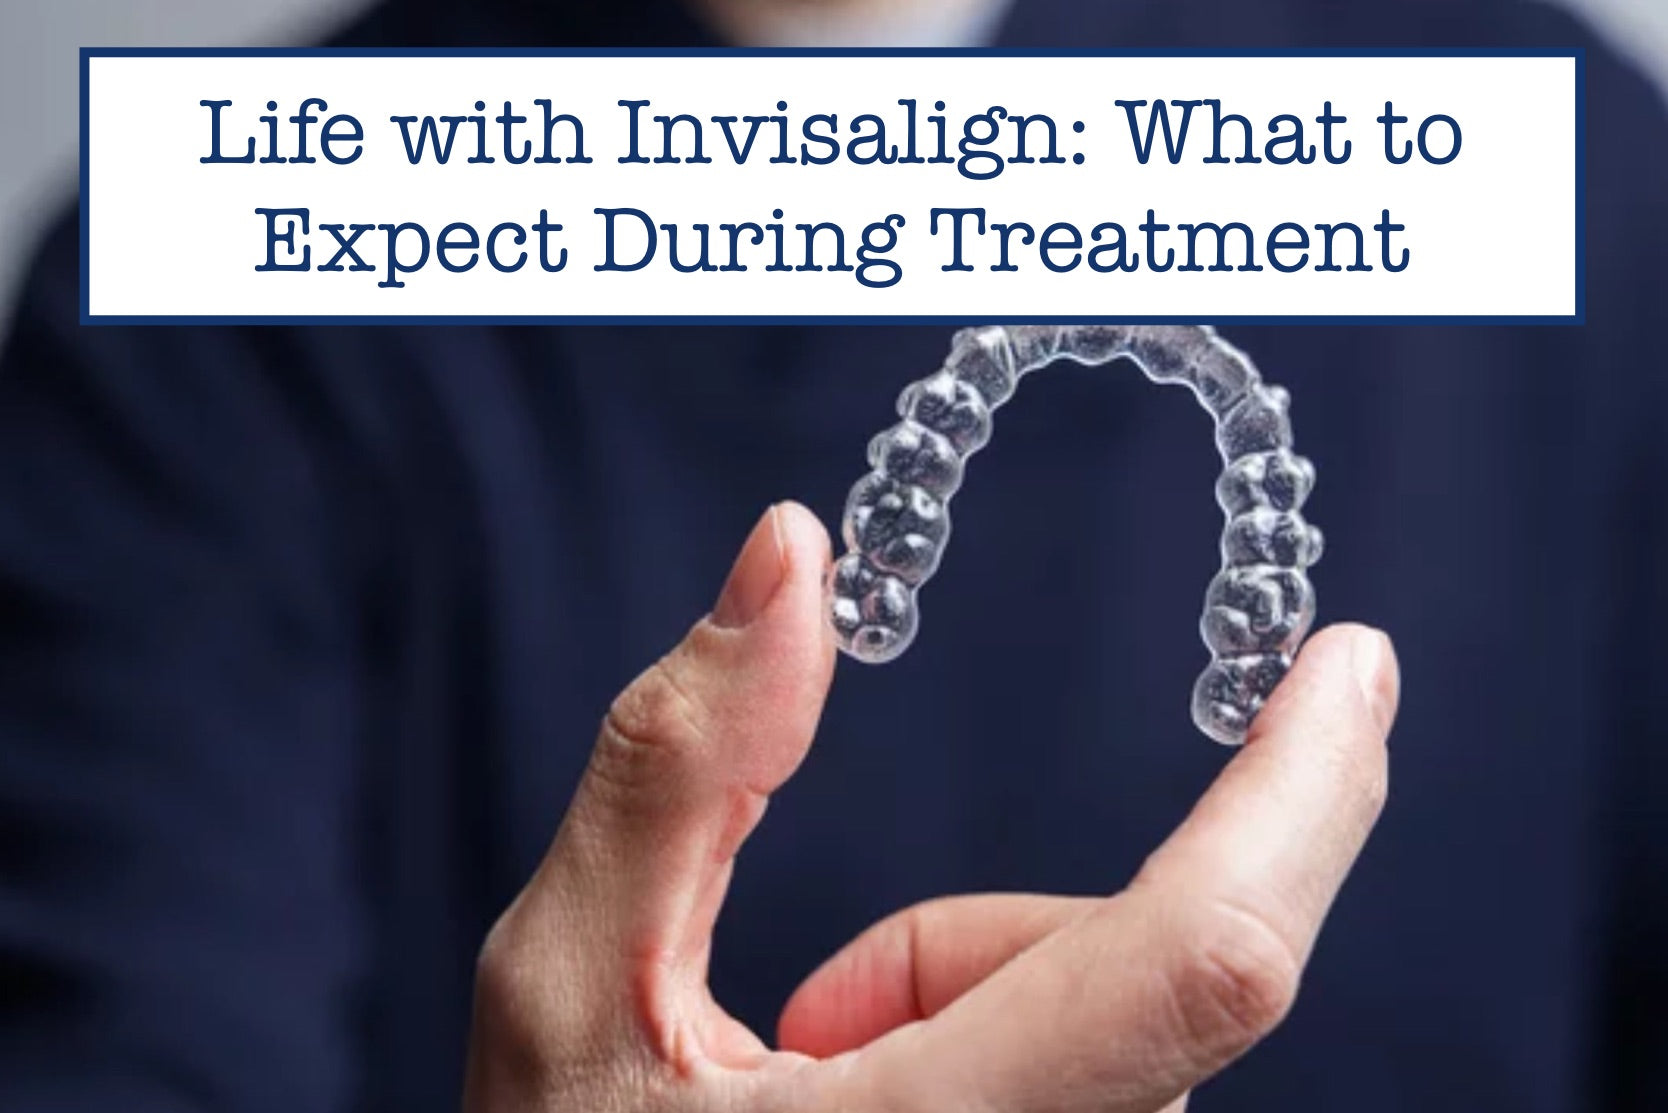 Life with Invisalign: What to Expect During Treatment